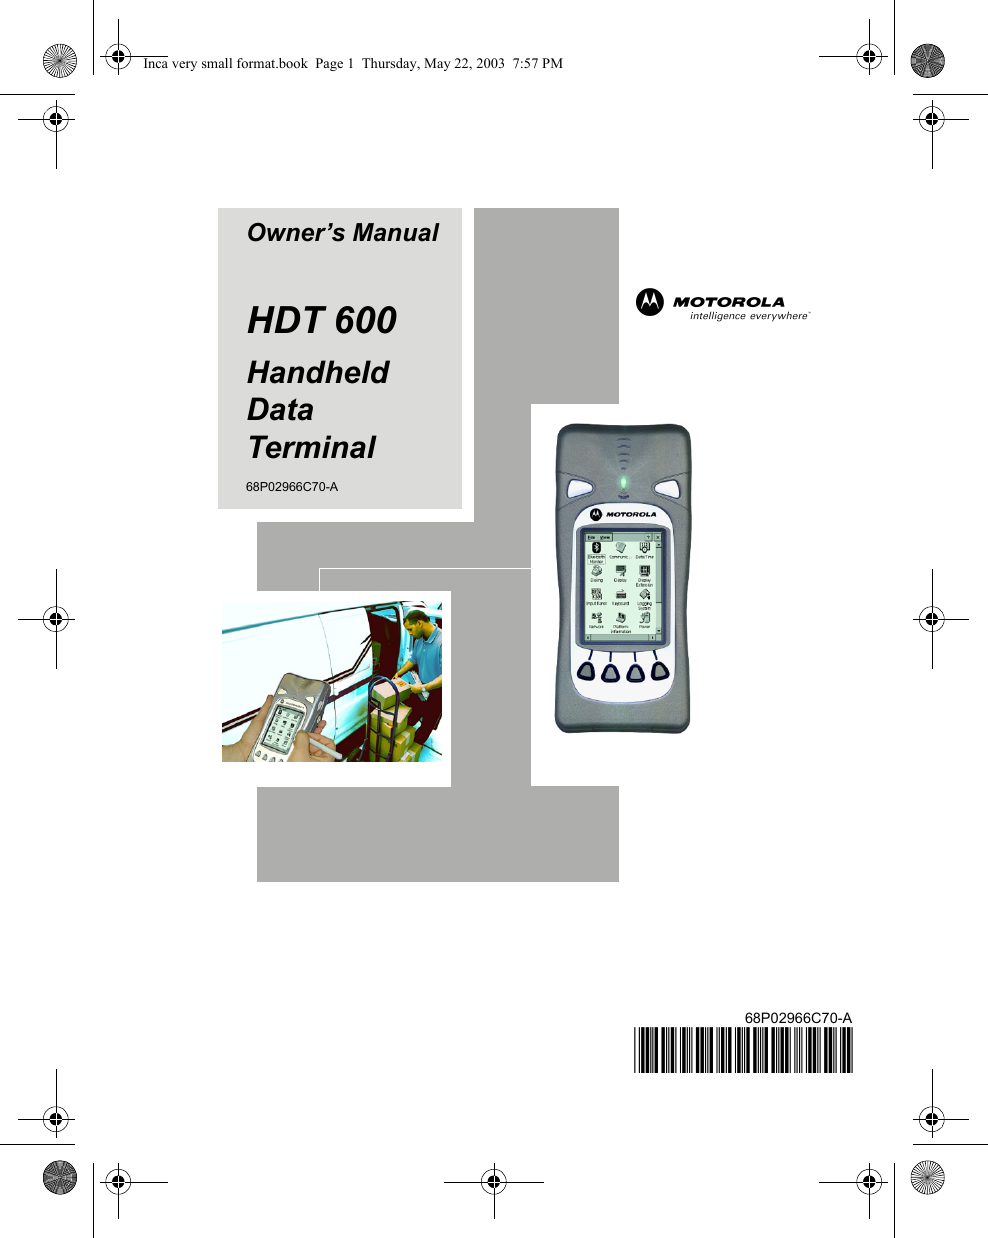 Owner’s ManualHDT 600Handheld Data Terminal68P02966C70-A 68P02966C70-A@6802966C70@aInca very small format.book  Page 1  Thursday, May 22, 2003  7:57 PM